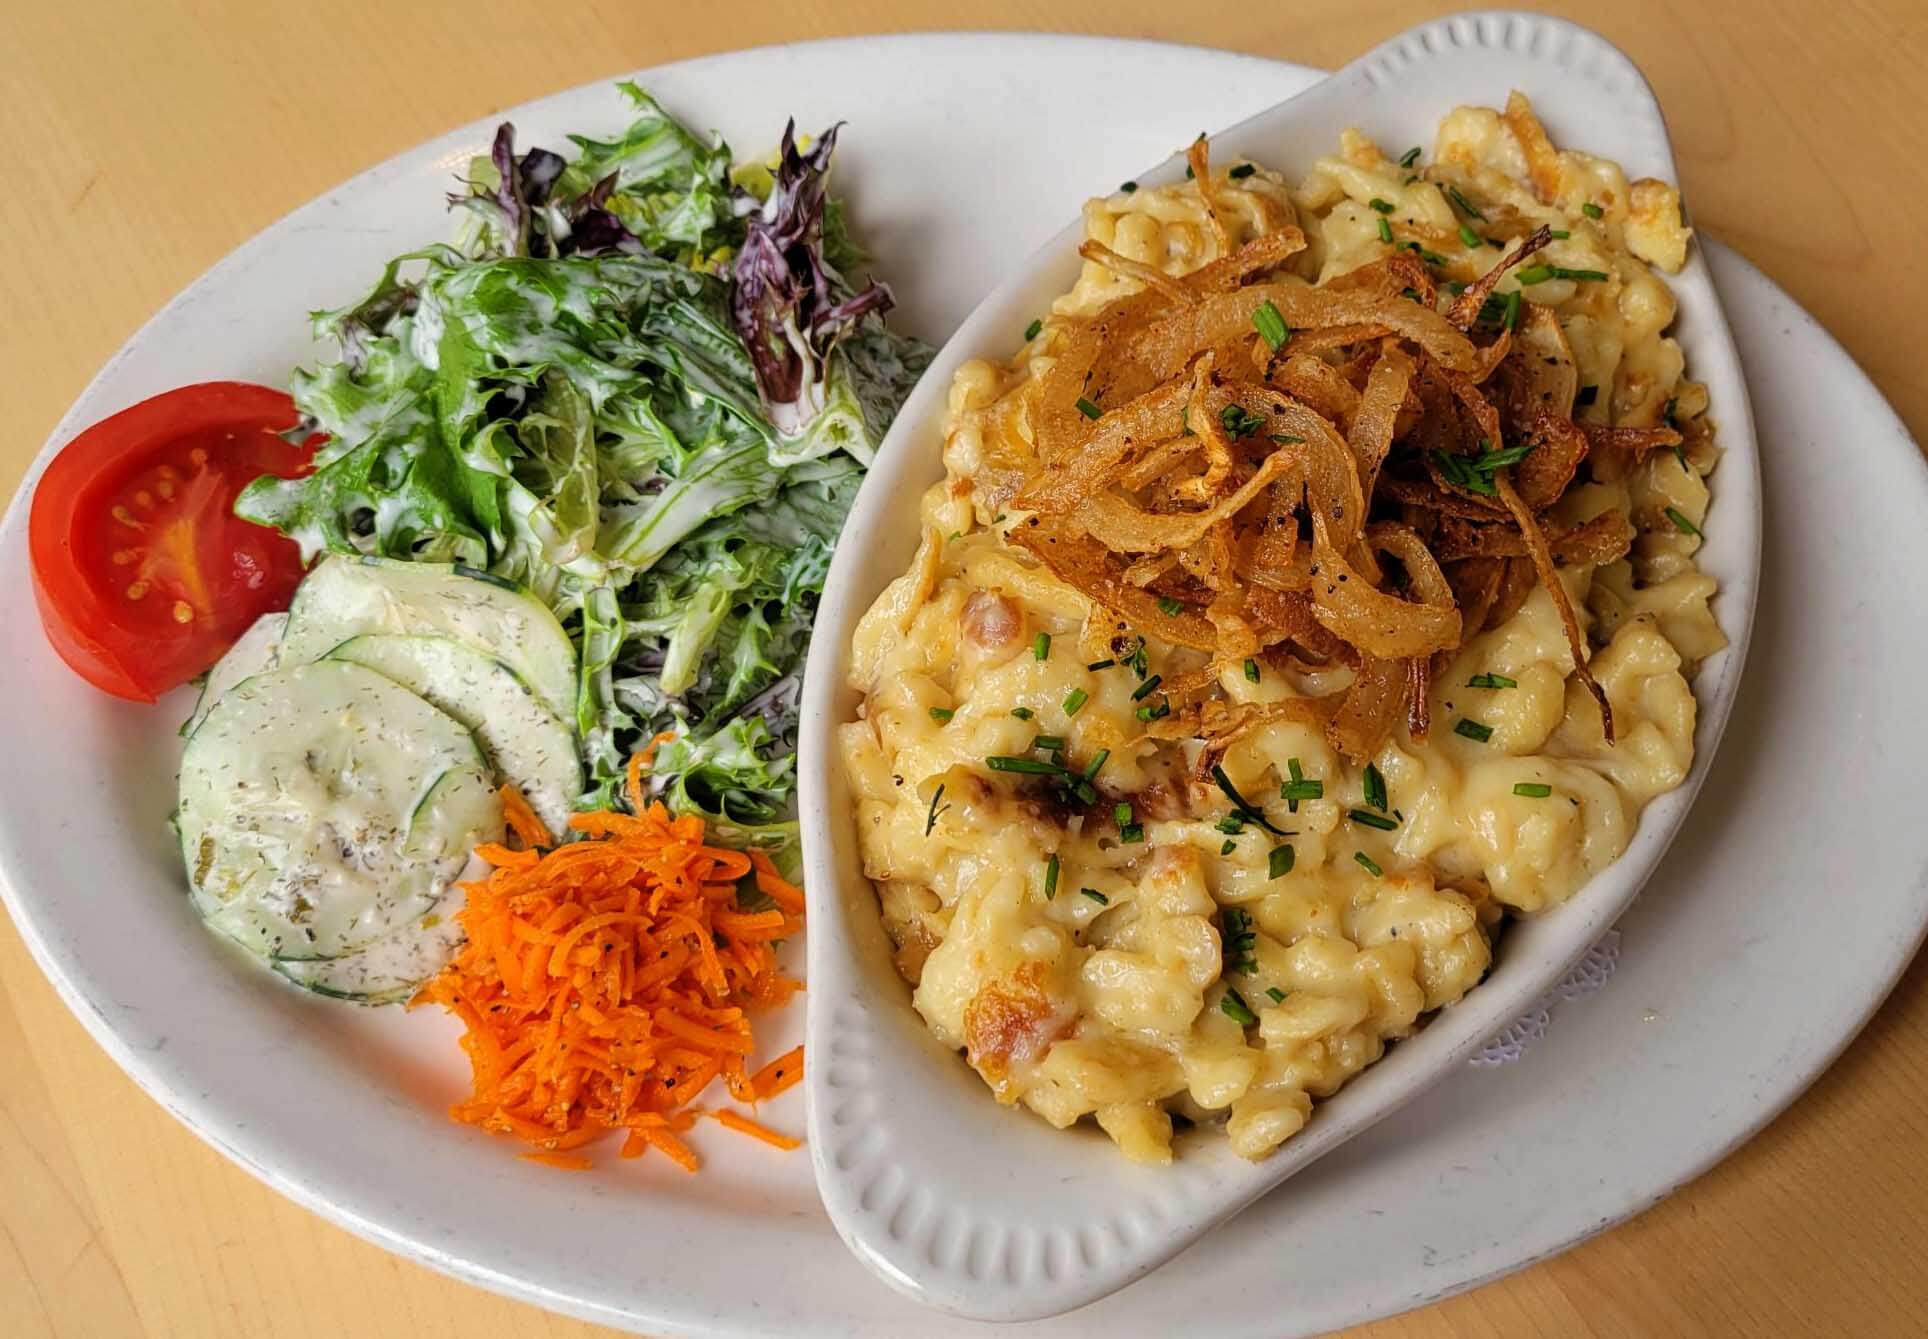 Macaronie and cheese and a salad on a plate.